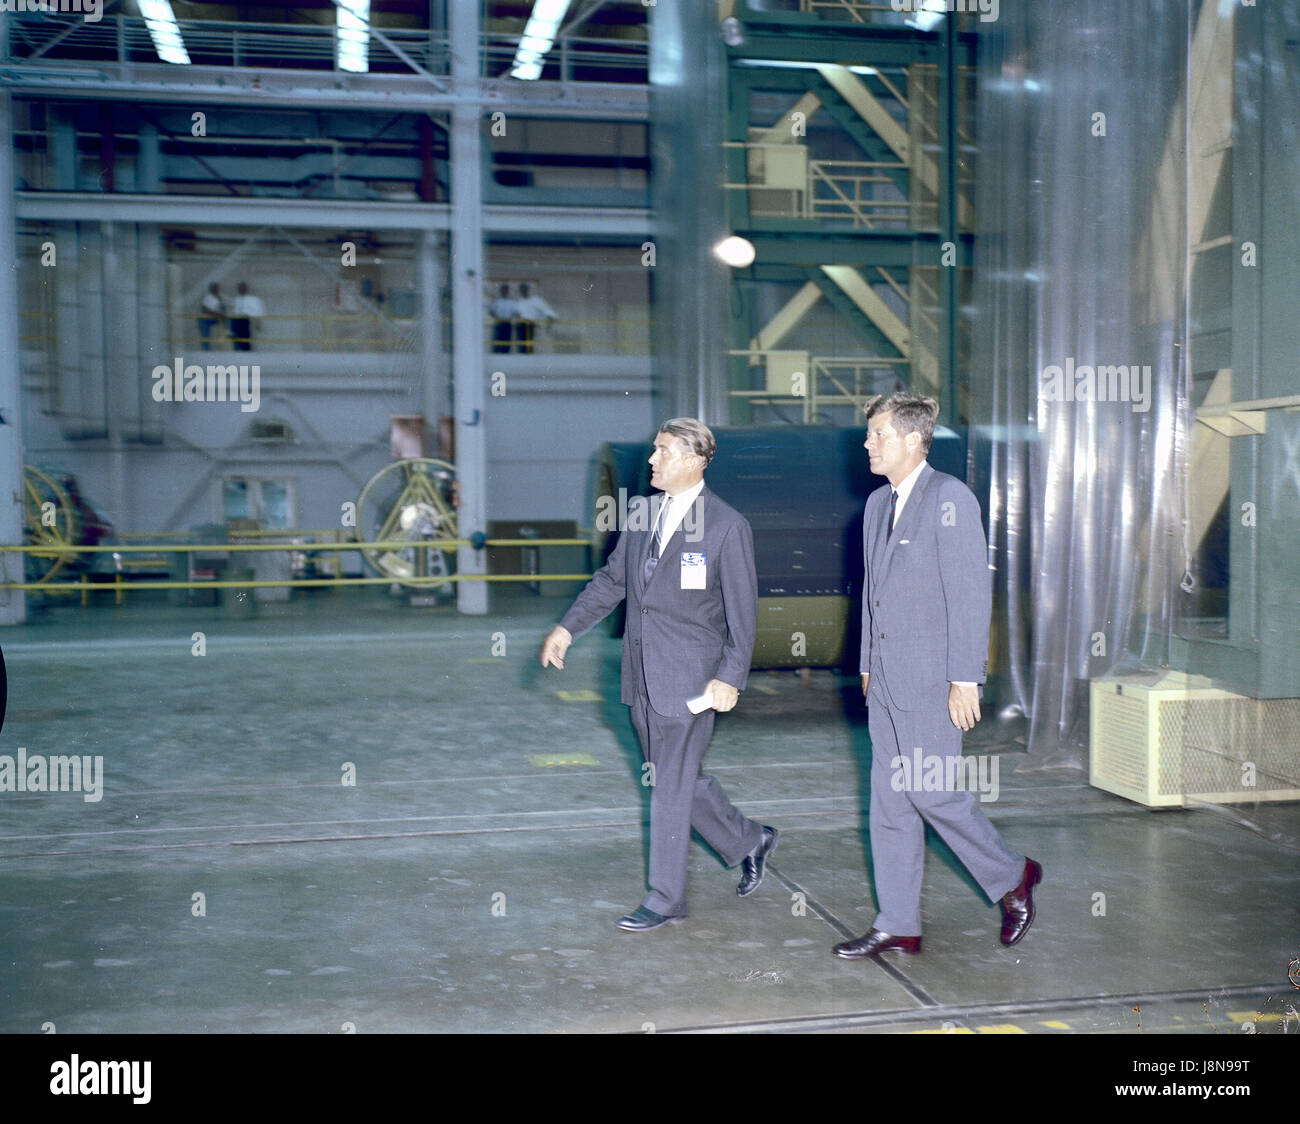 United States President John F. Kennedy visited Marshall Space Flight Center (MSFC) in Huntsville, Alabama on September 11, 1962. Here President Kennedy and Dr. Wernher von Braun, MSFC Director, tour one of the laboratories..Credit: NASA via CNP /MediaPunch Stock Photo